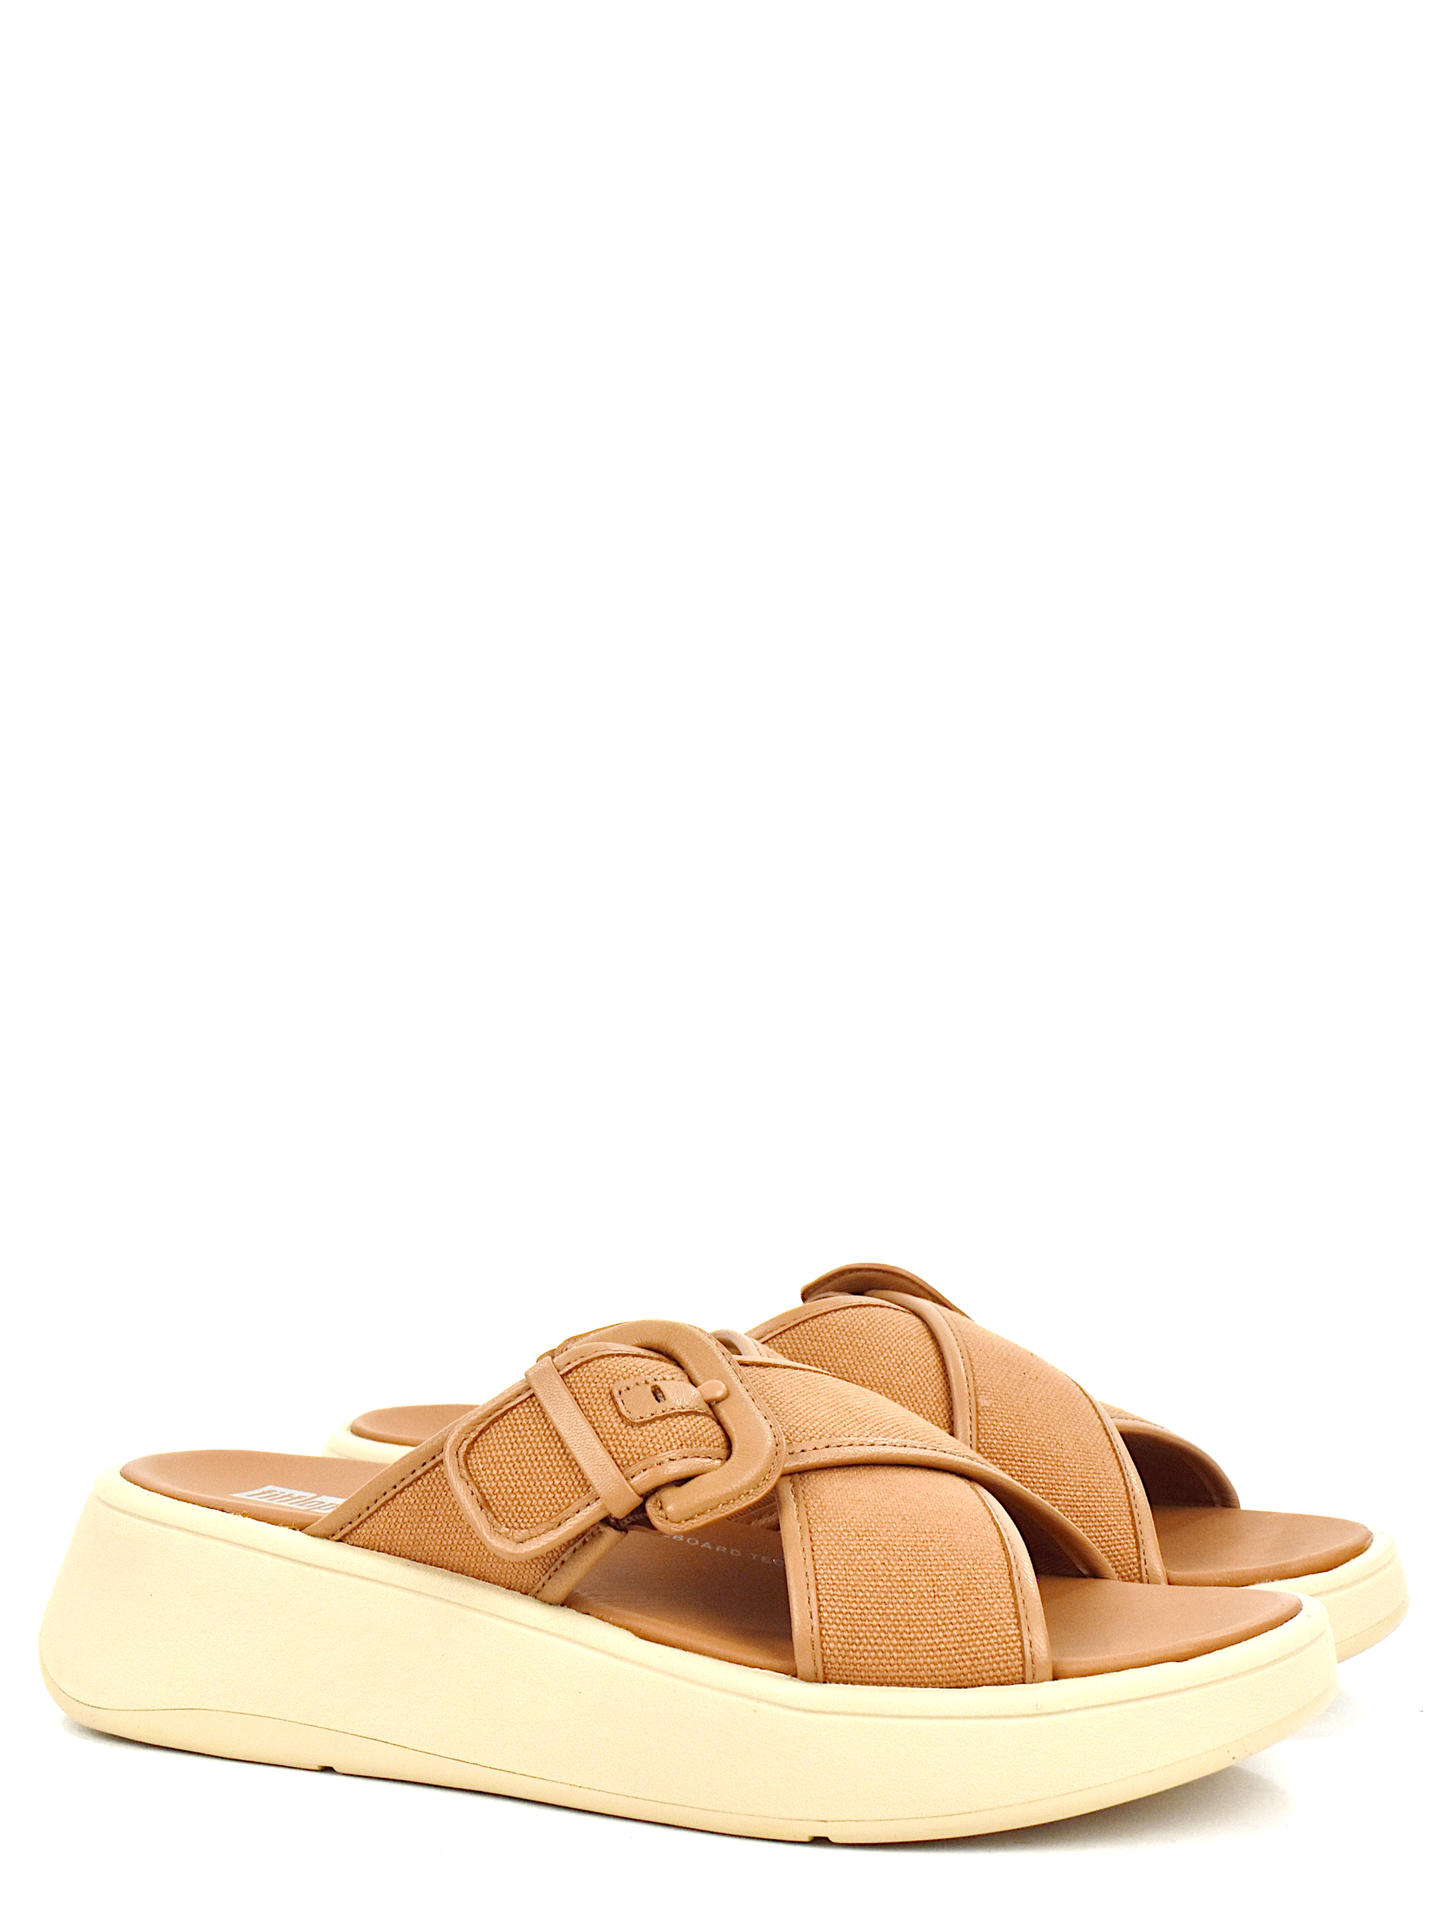 SANDALO BASSO FITFLOP FY8 CUOIO